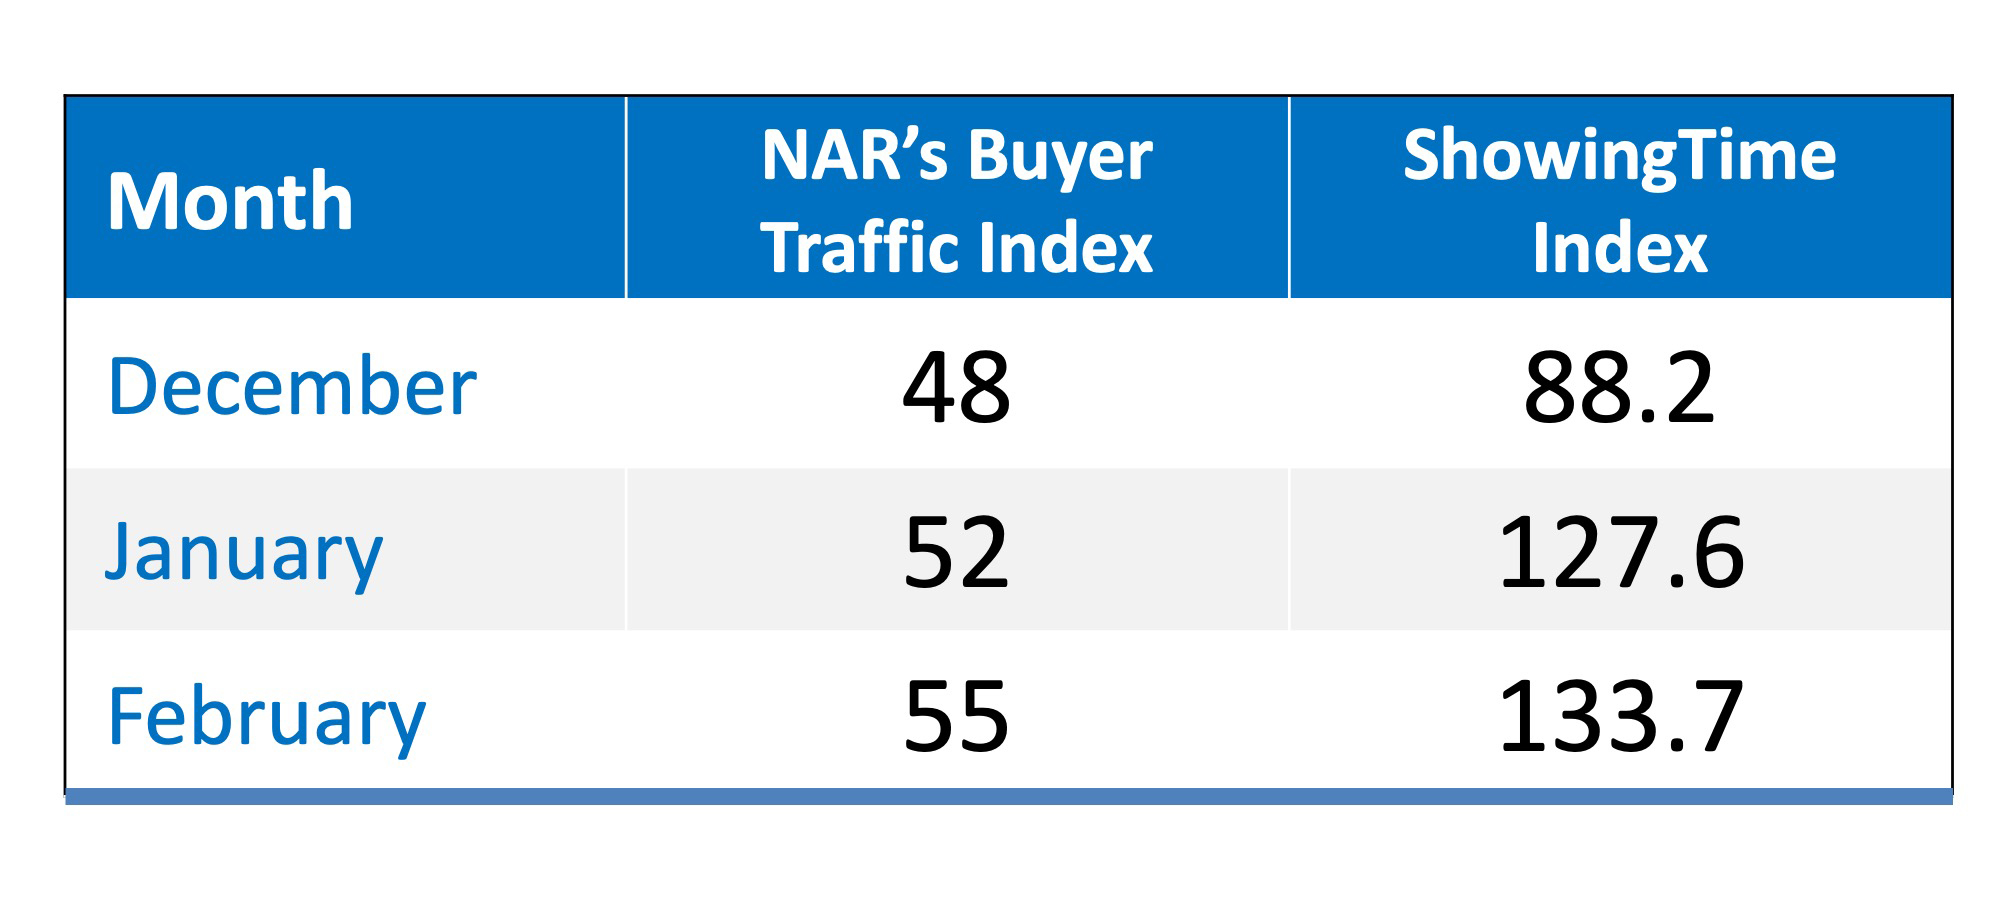 Table showing Time Showing Index and the National Association of REALTORS Buyer Traffic Index